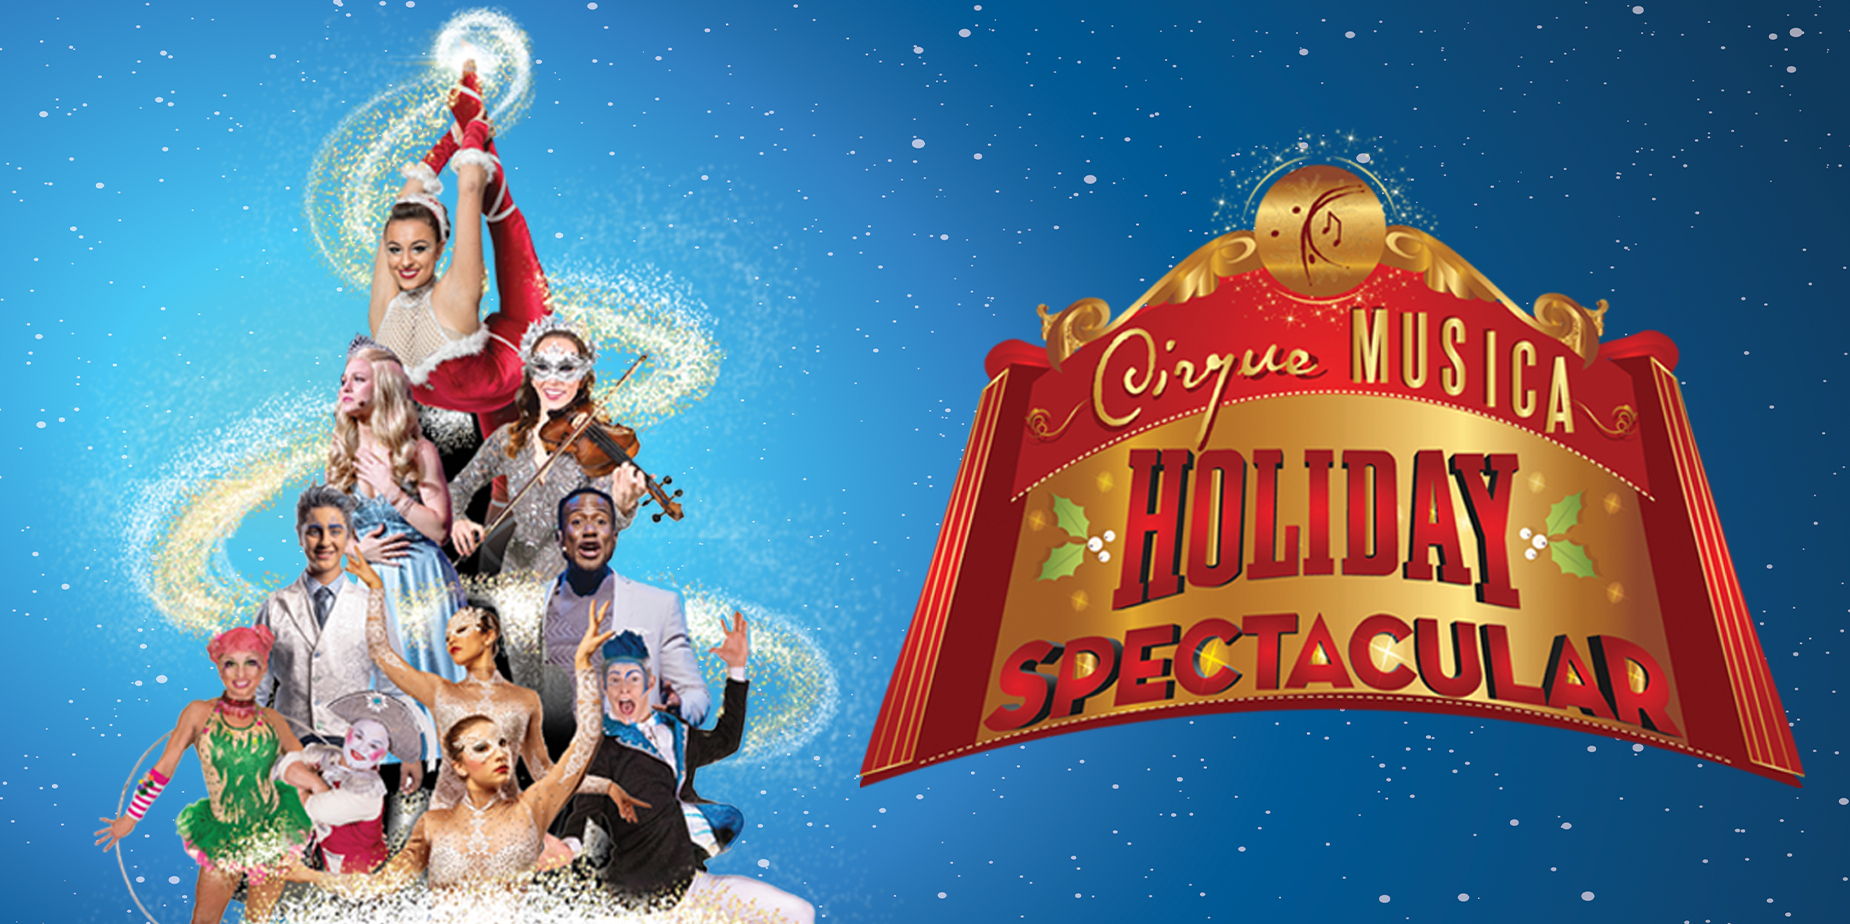 Cirque Musica Holiday Spectacular promotional image